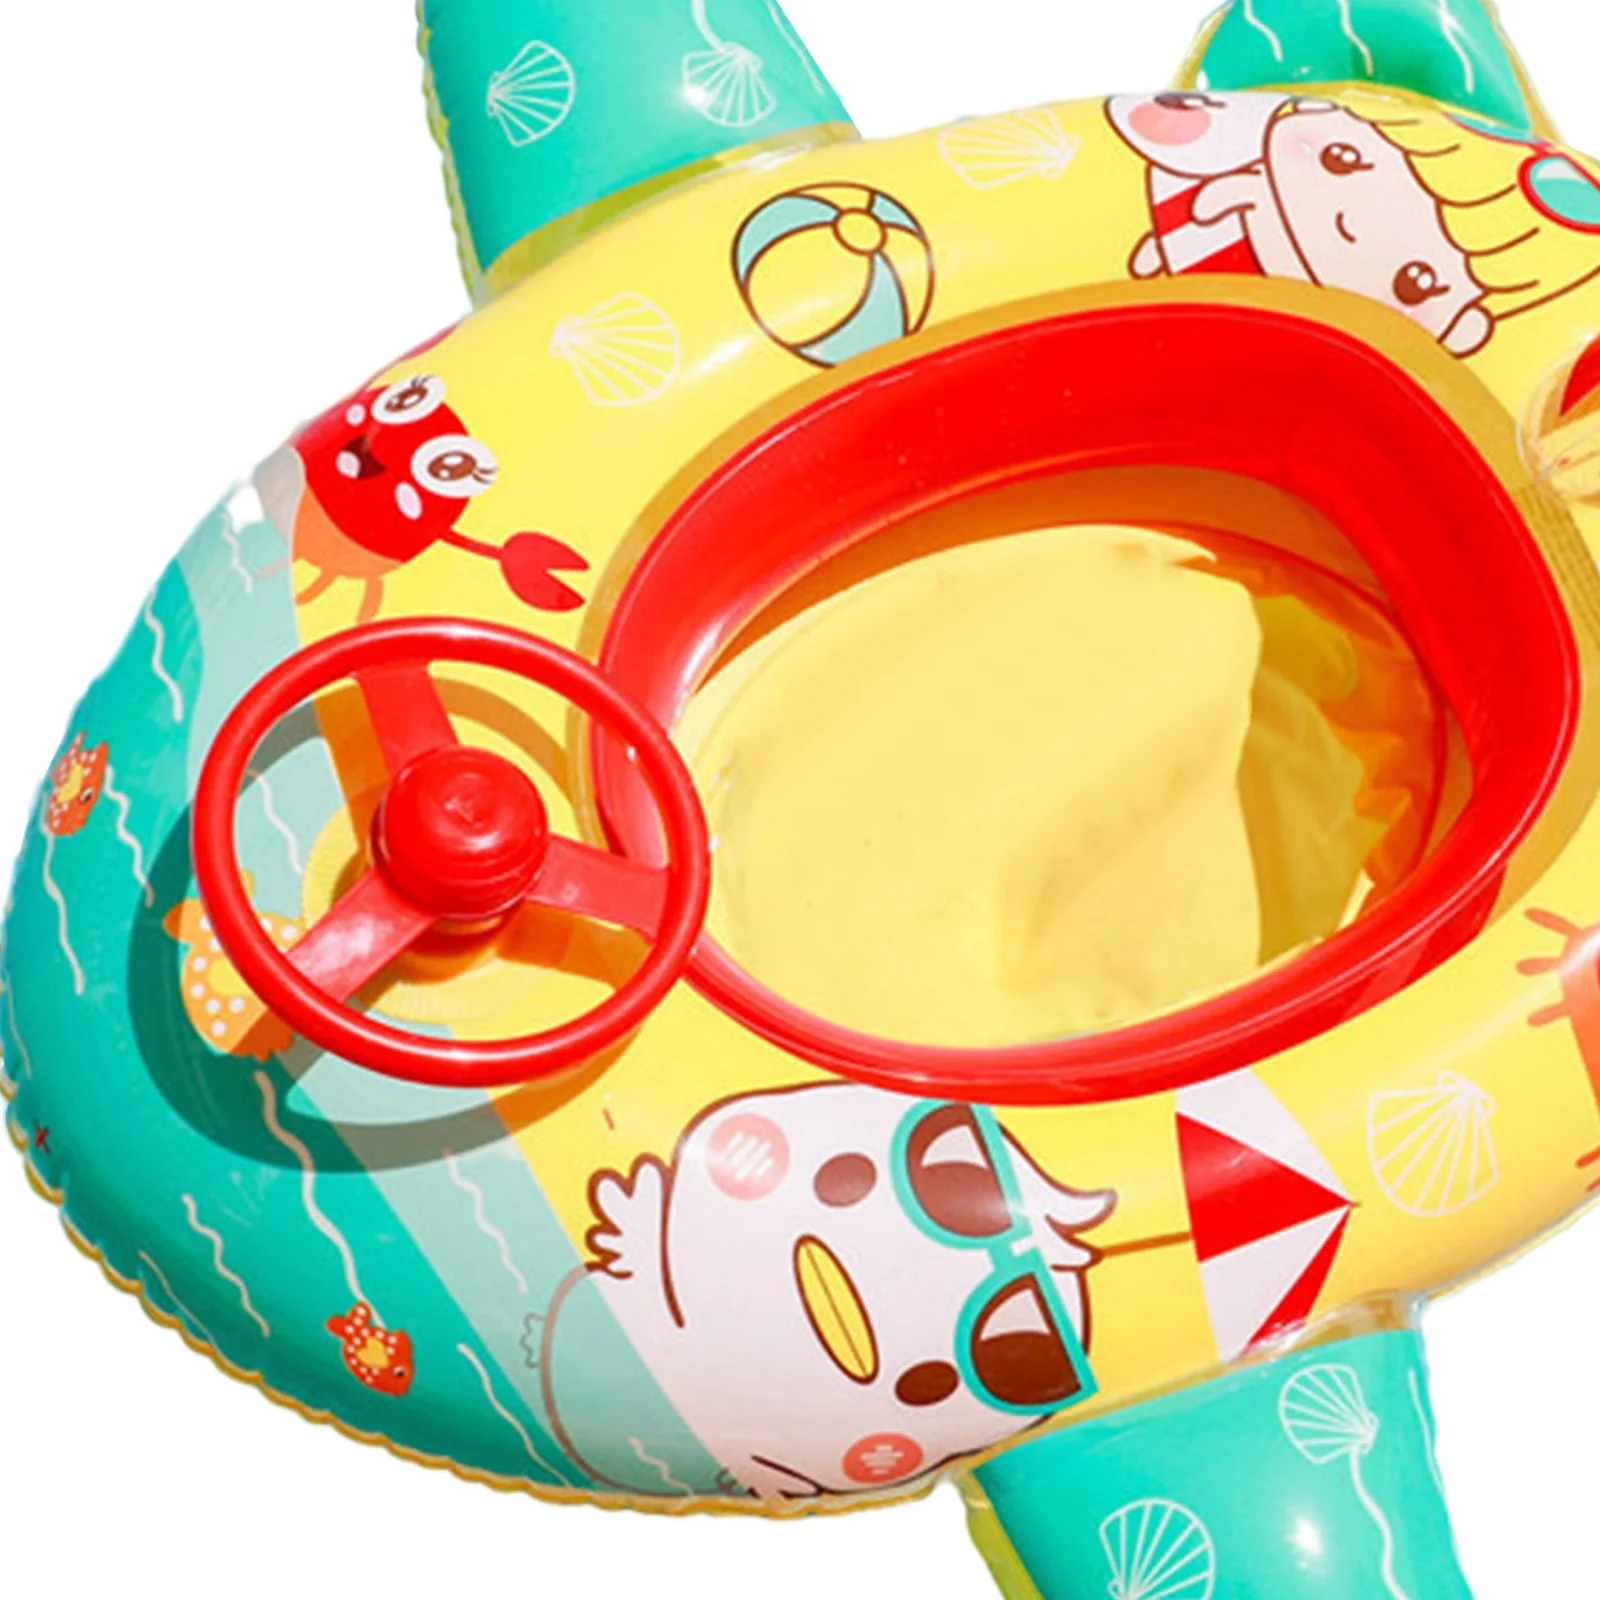 Aircraft Shaped Baby Swimming Float Boat Inflatable Pool Float with Steering Wheel Horn [for Boys Girls Summer Pool Swim Ring